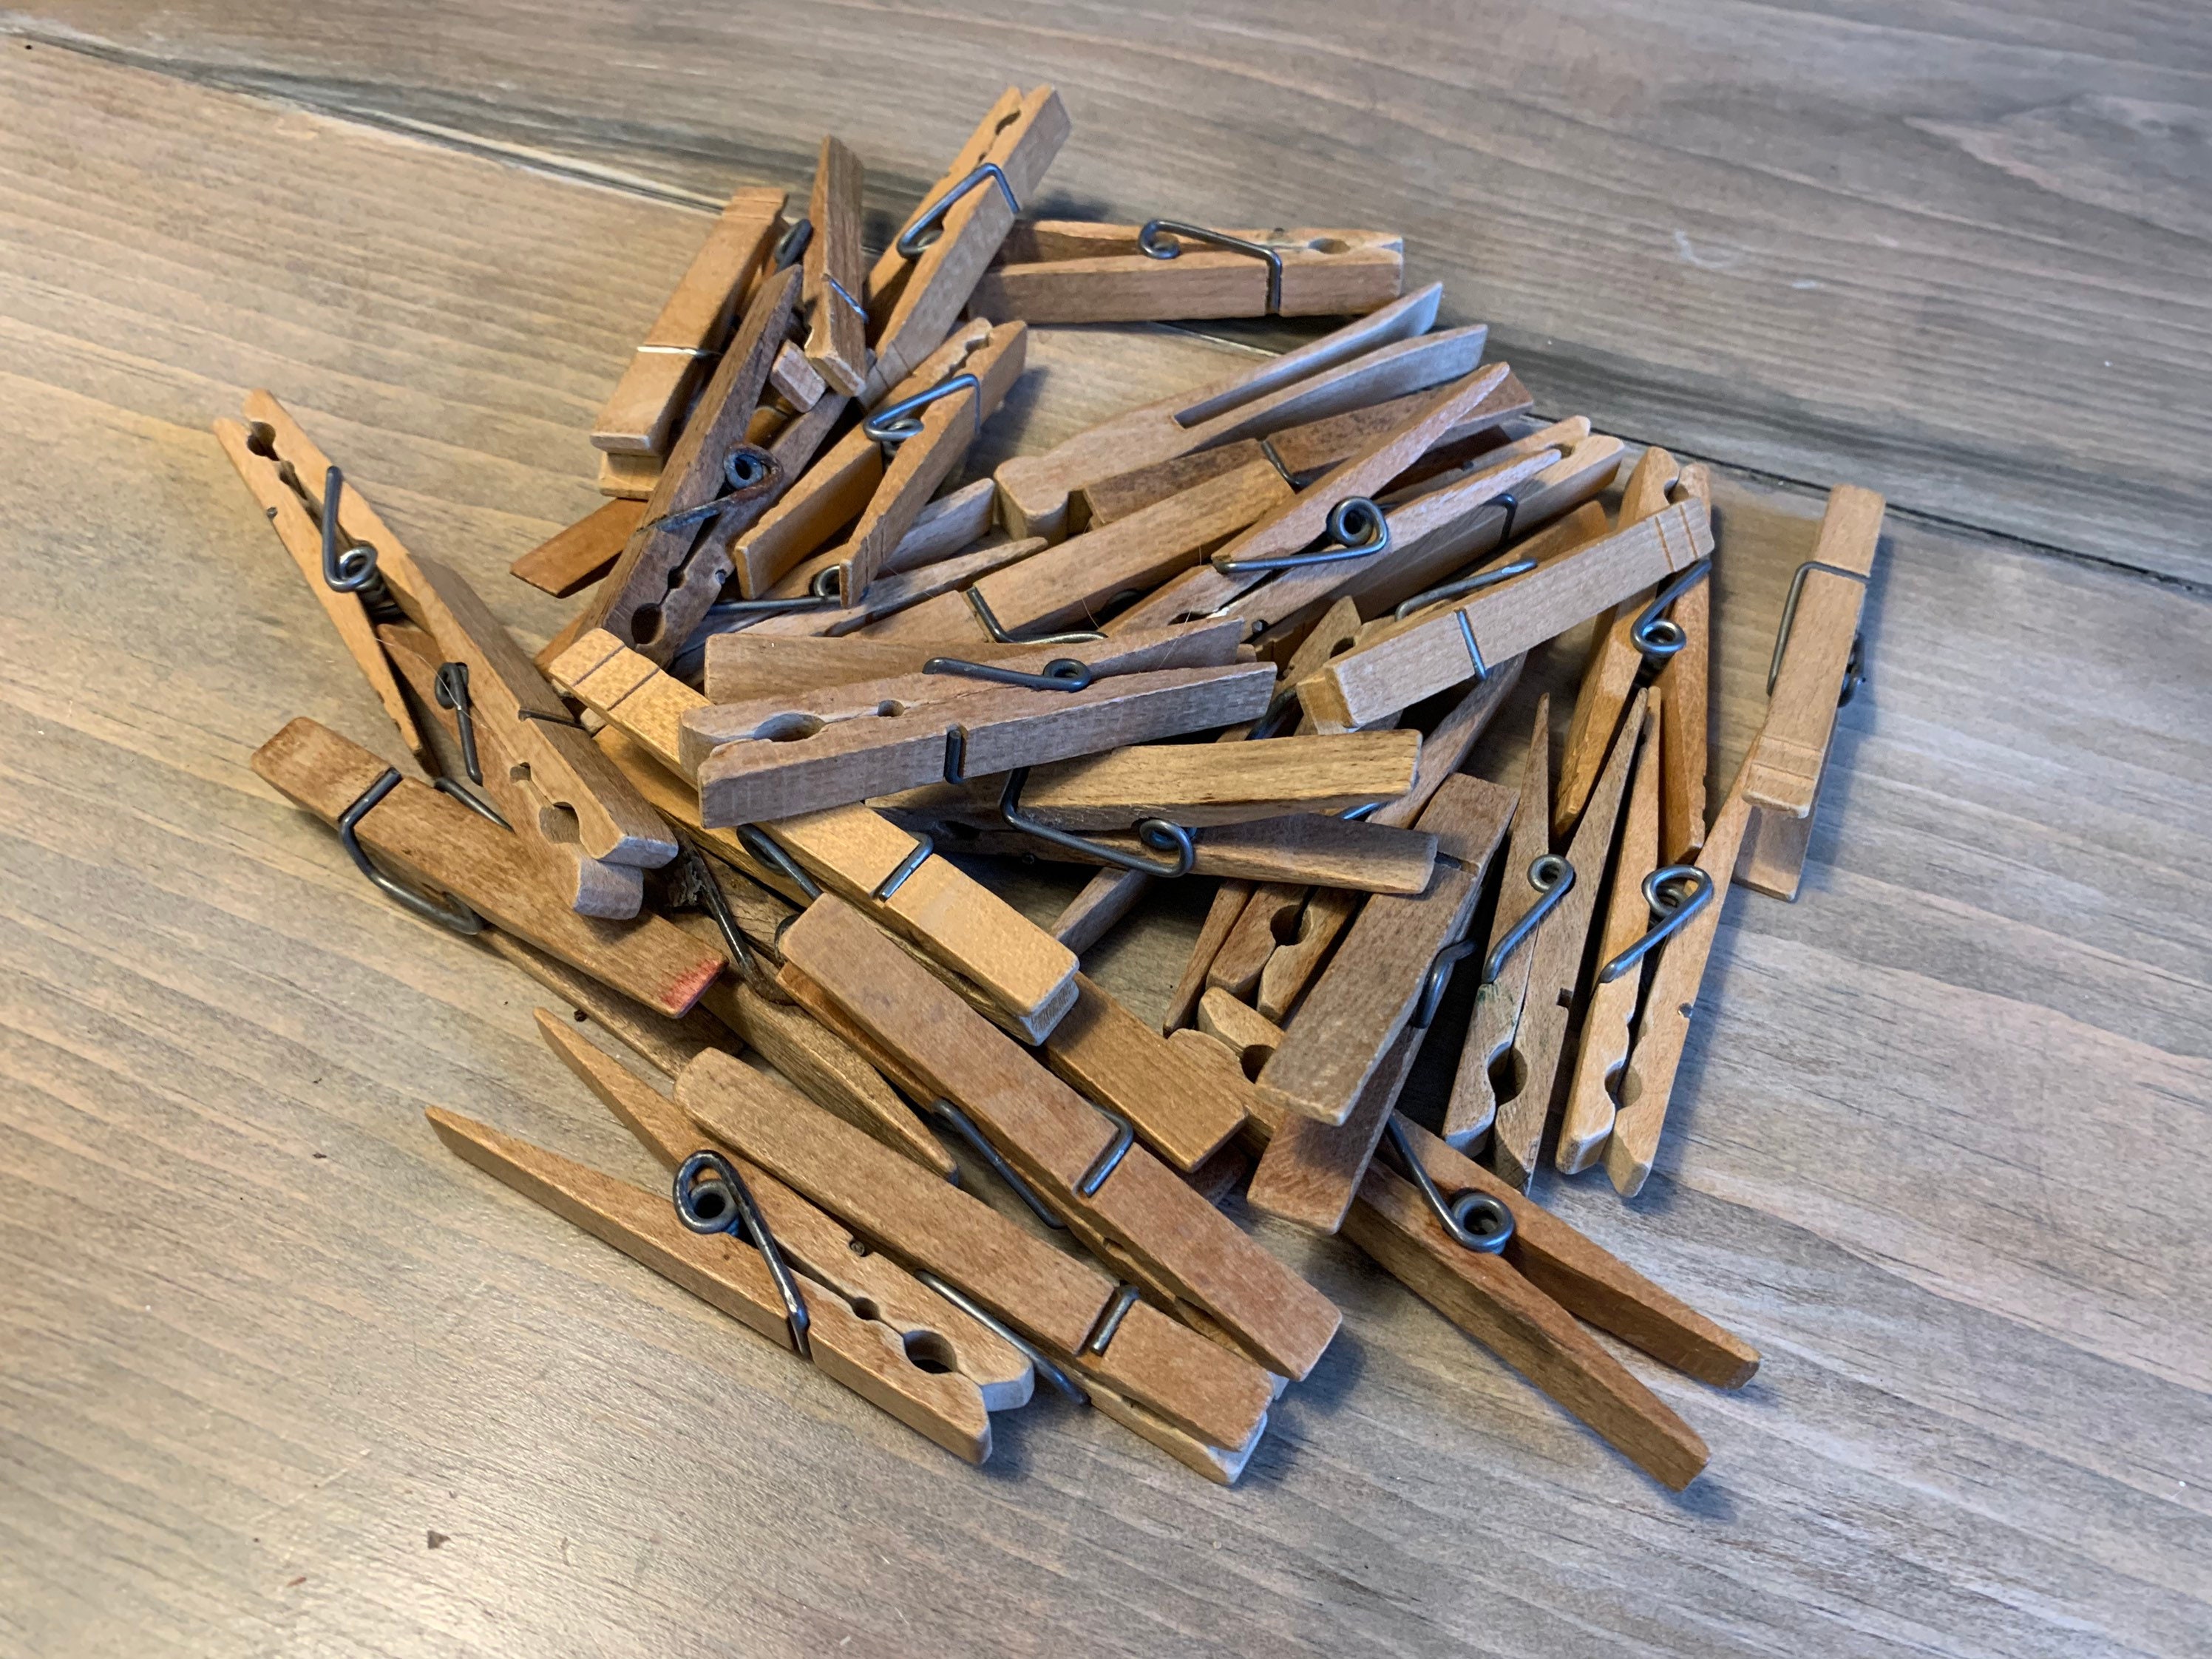 Wooden Clothes Pins Available Sizes: Large, Medium, Small, Extra Small Set  of 10 